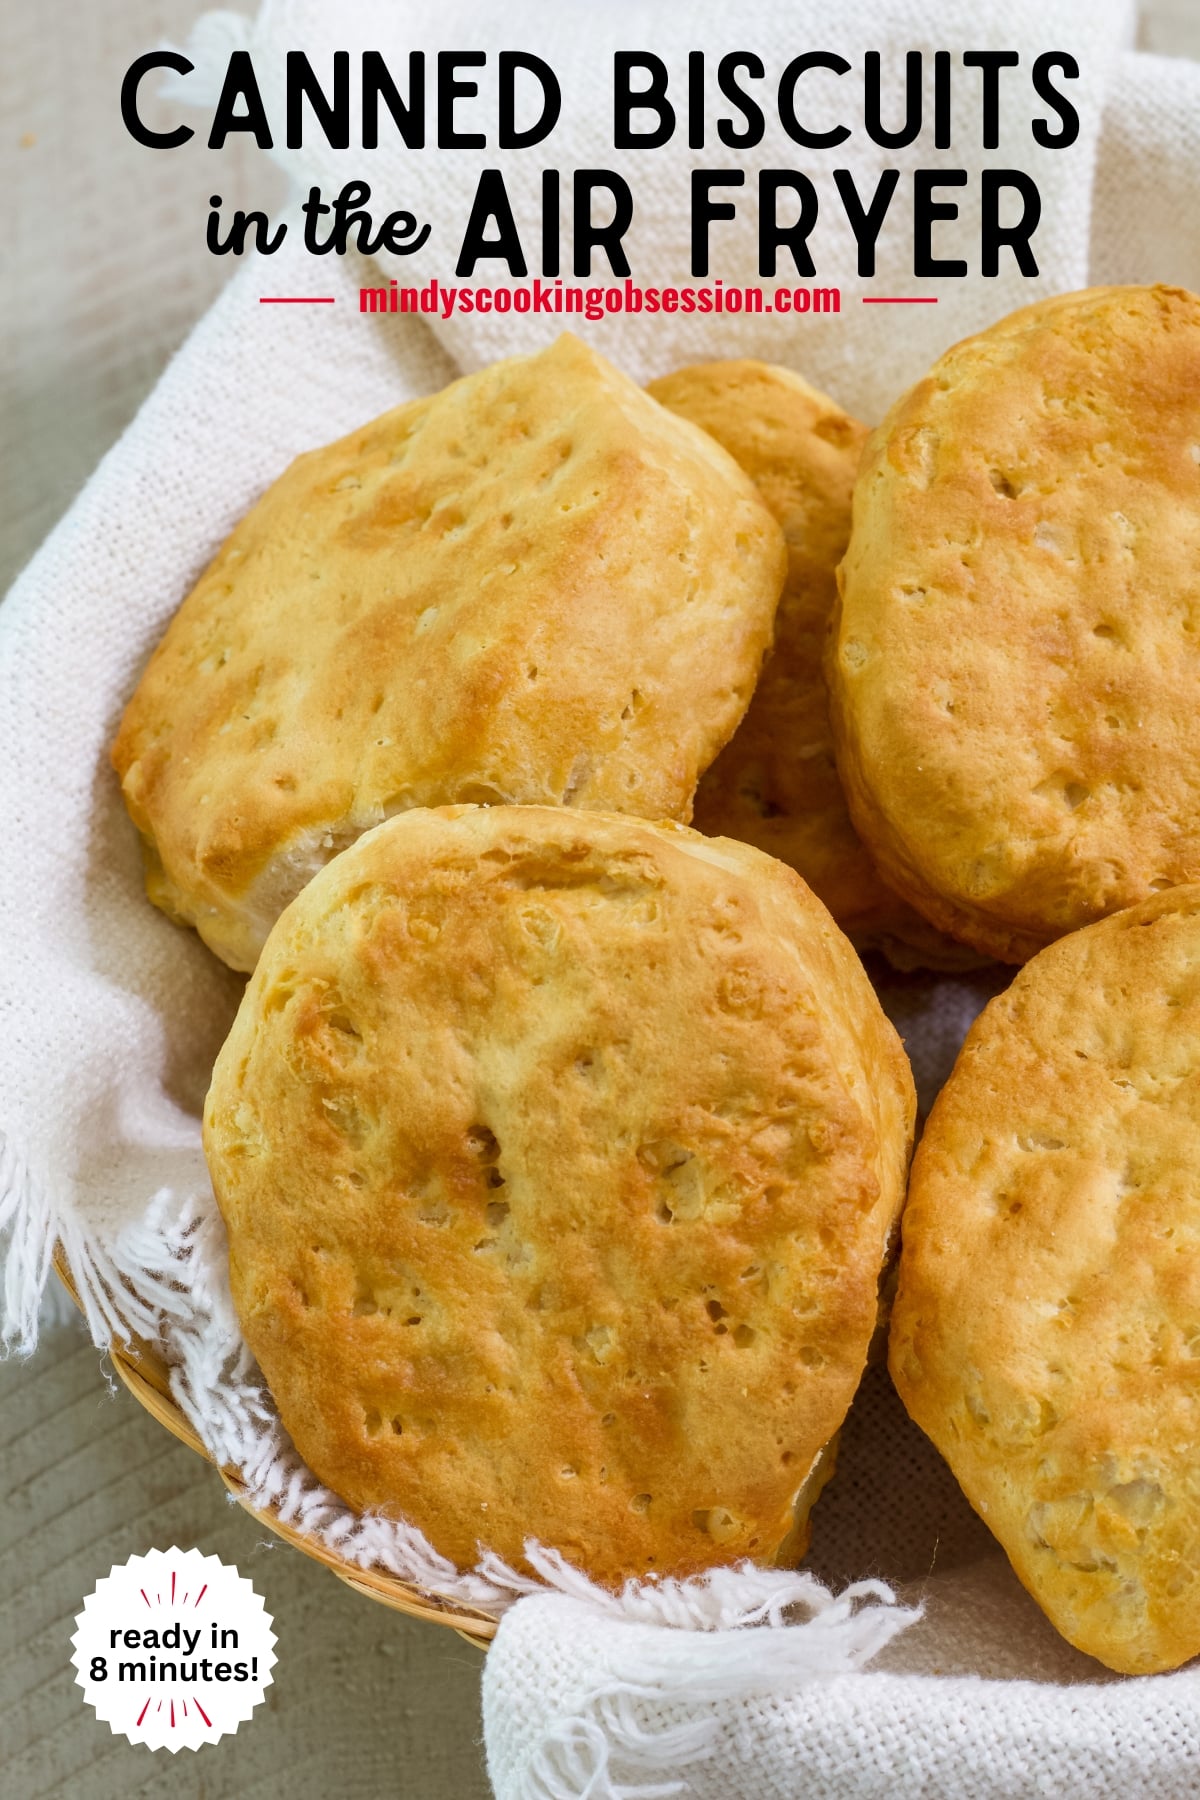 Canned Pillsbury Grands Biscuits in Air Fryer are so easy and perfect for quick weeknight meals or a lazy weekend breakfast or brunch.  via @mindyscookingobsession